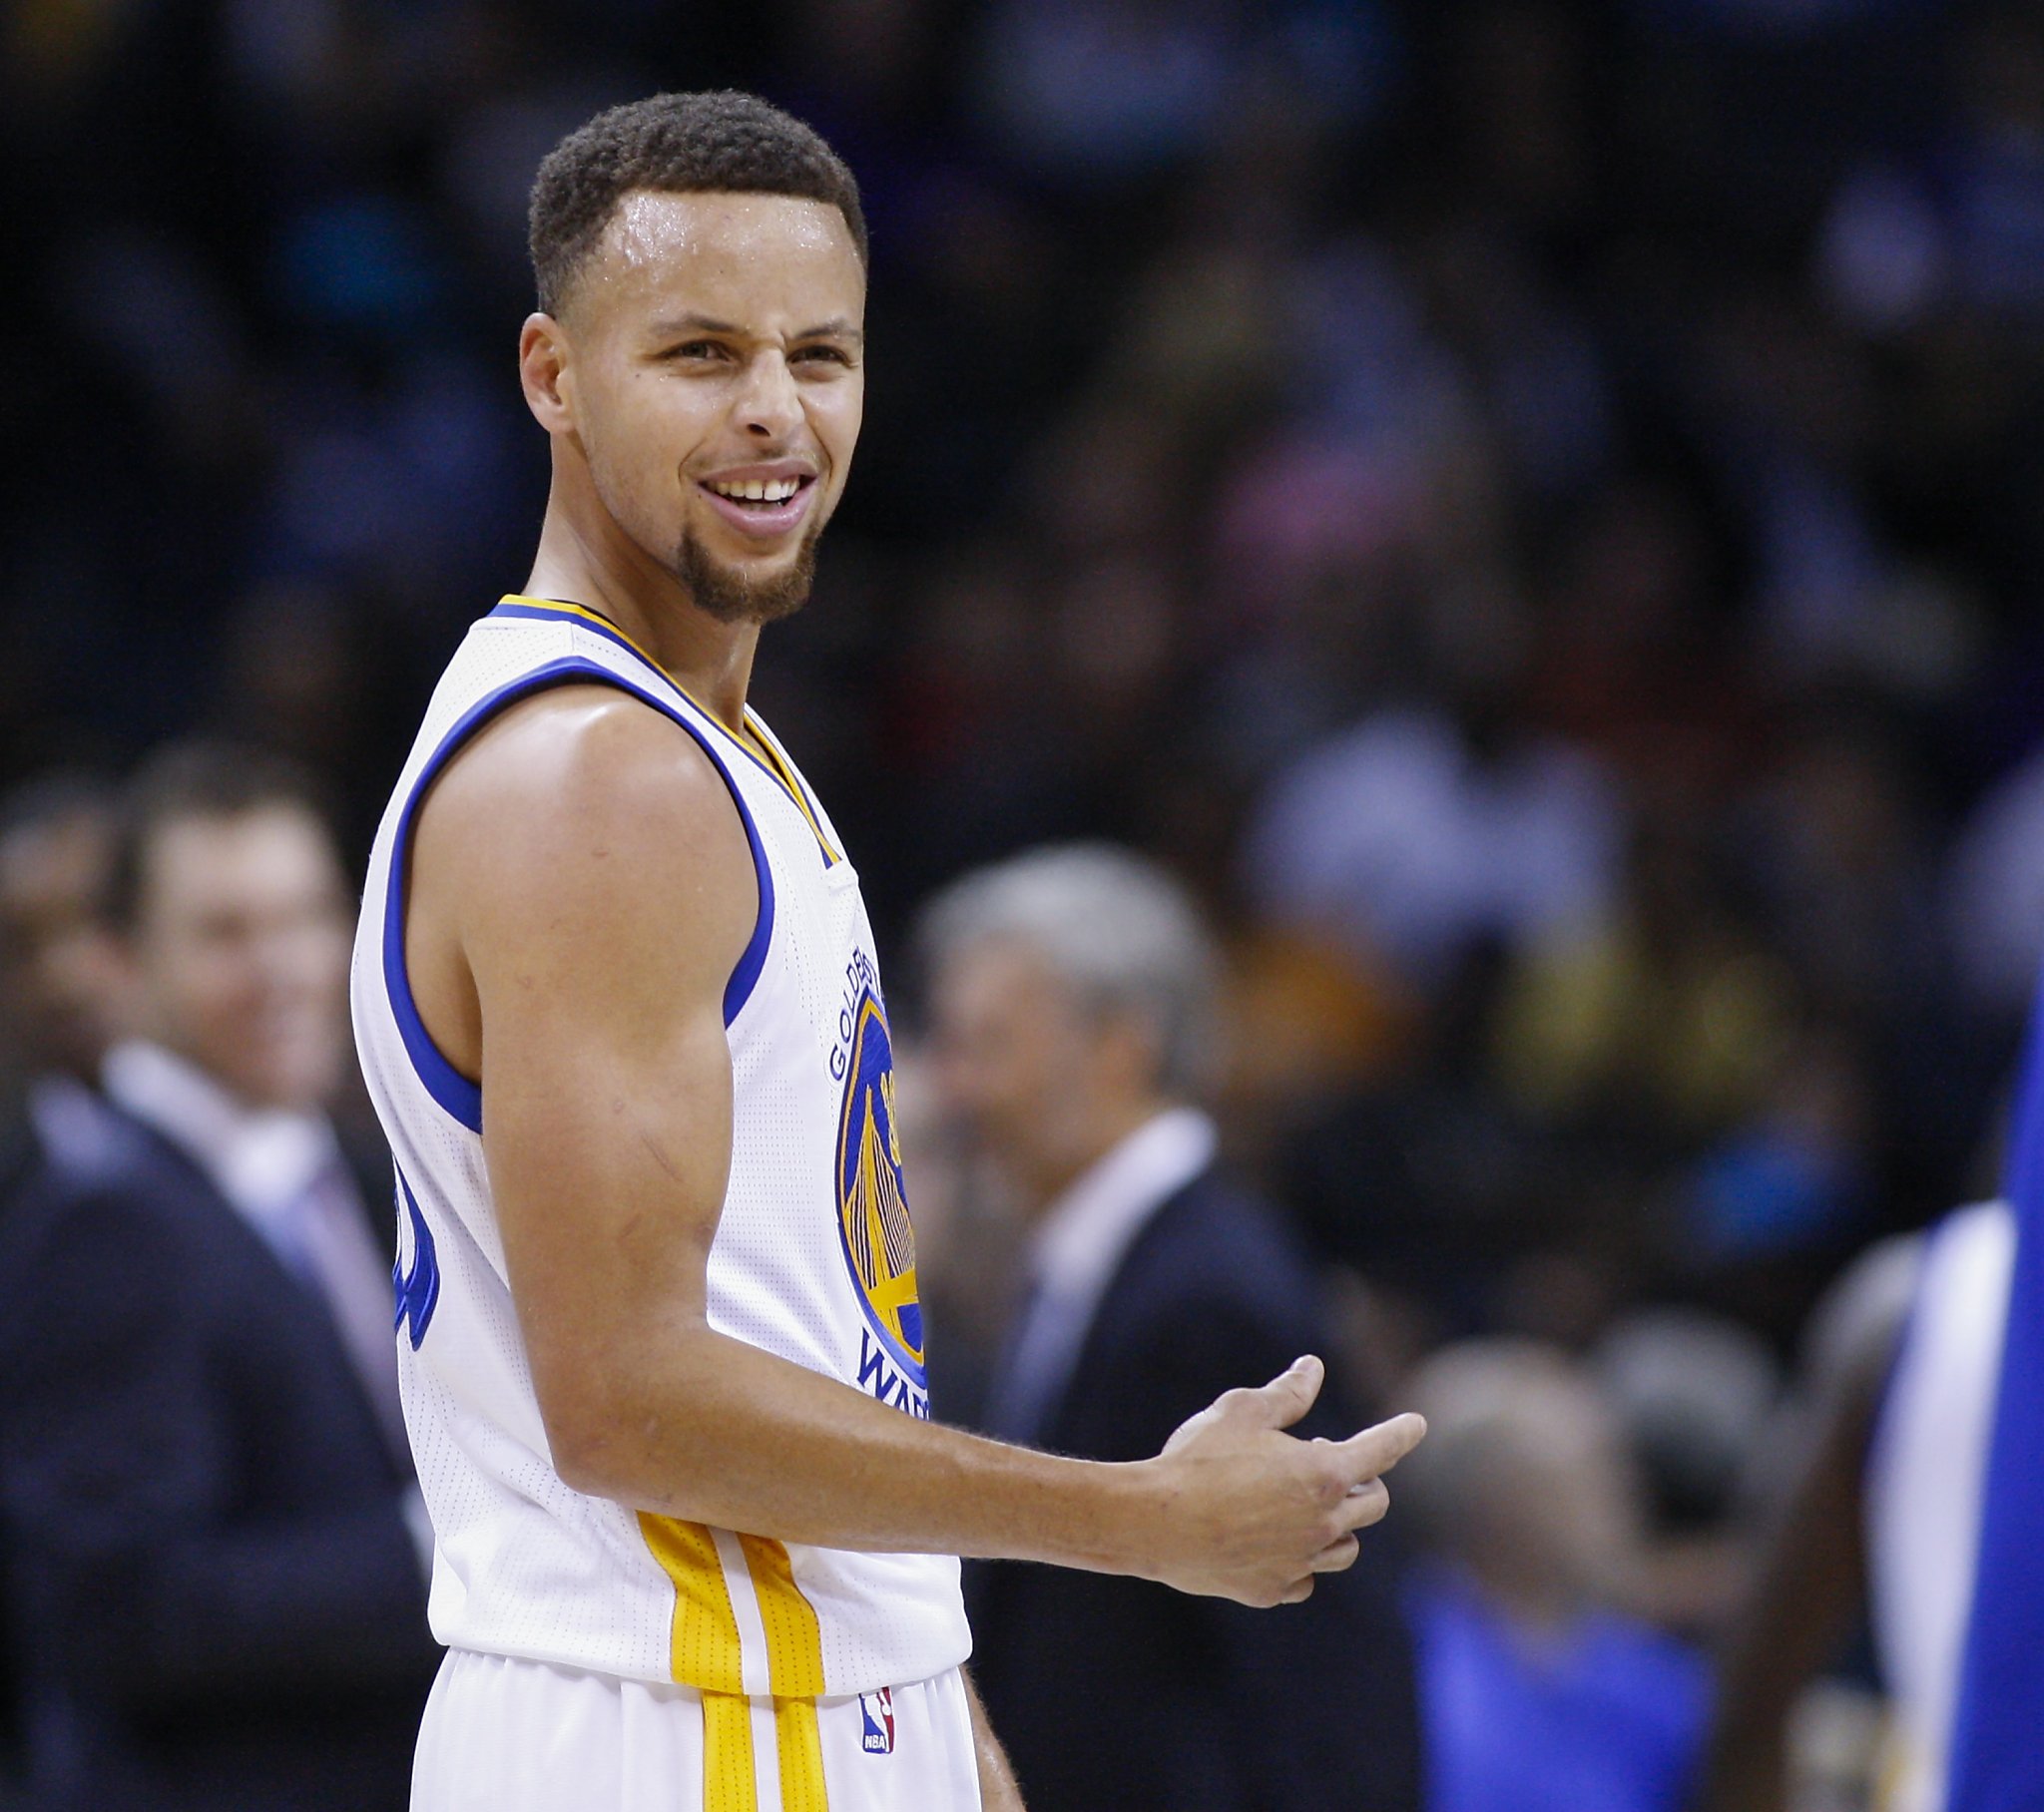 Warriors’ Curry scores 40, leads Golden State to 20th straight win CHARLOTT...